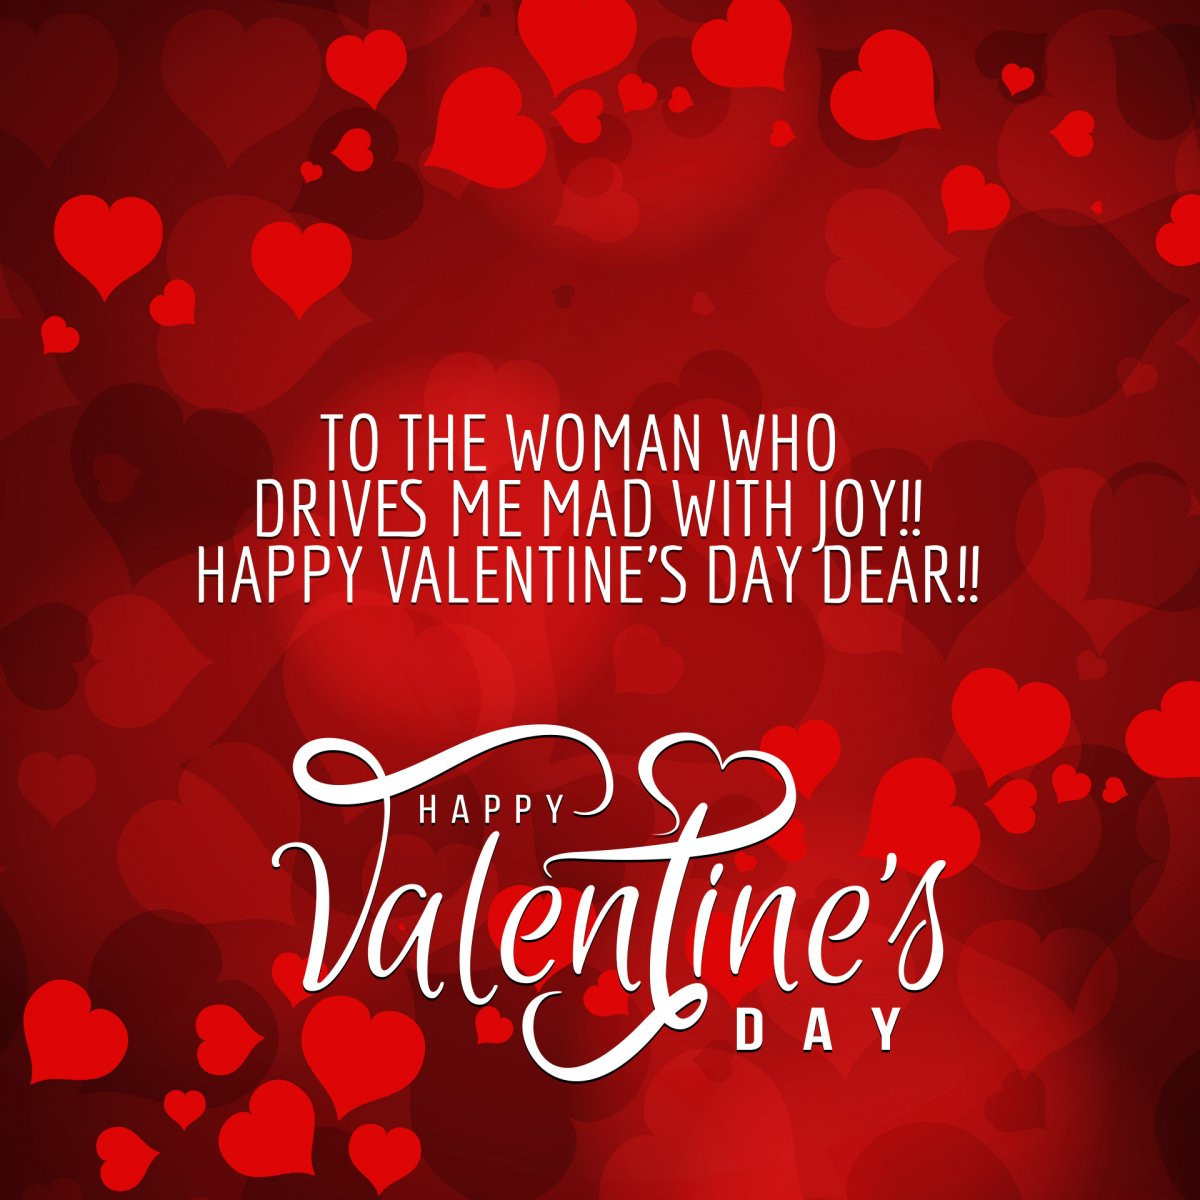 Quotes For Valentines Day Cards
 Cute Happy Valentine’s Day 2019 Wishes Messages and Love